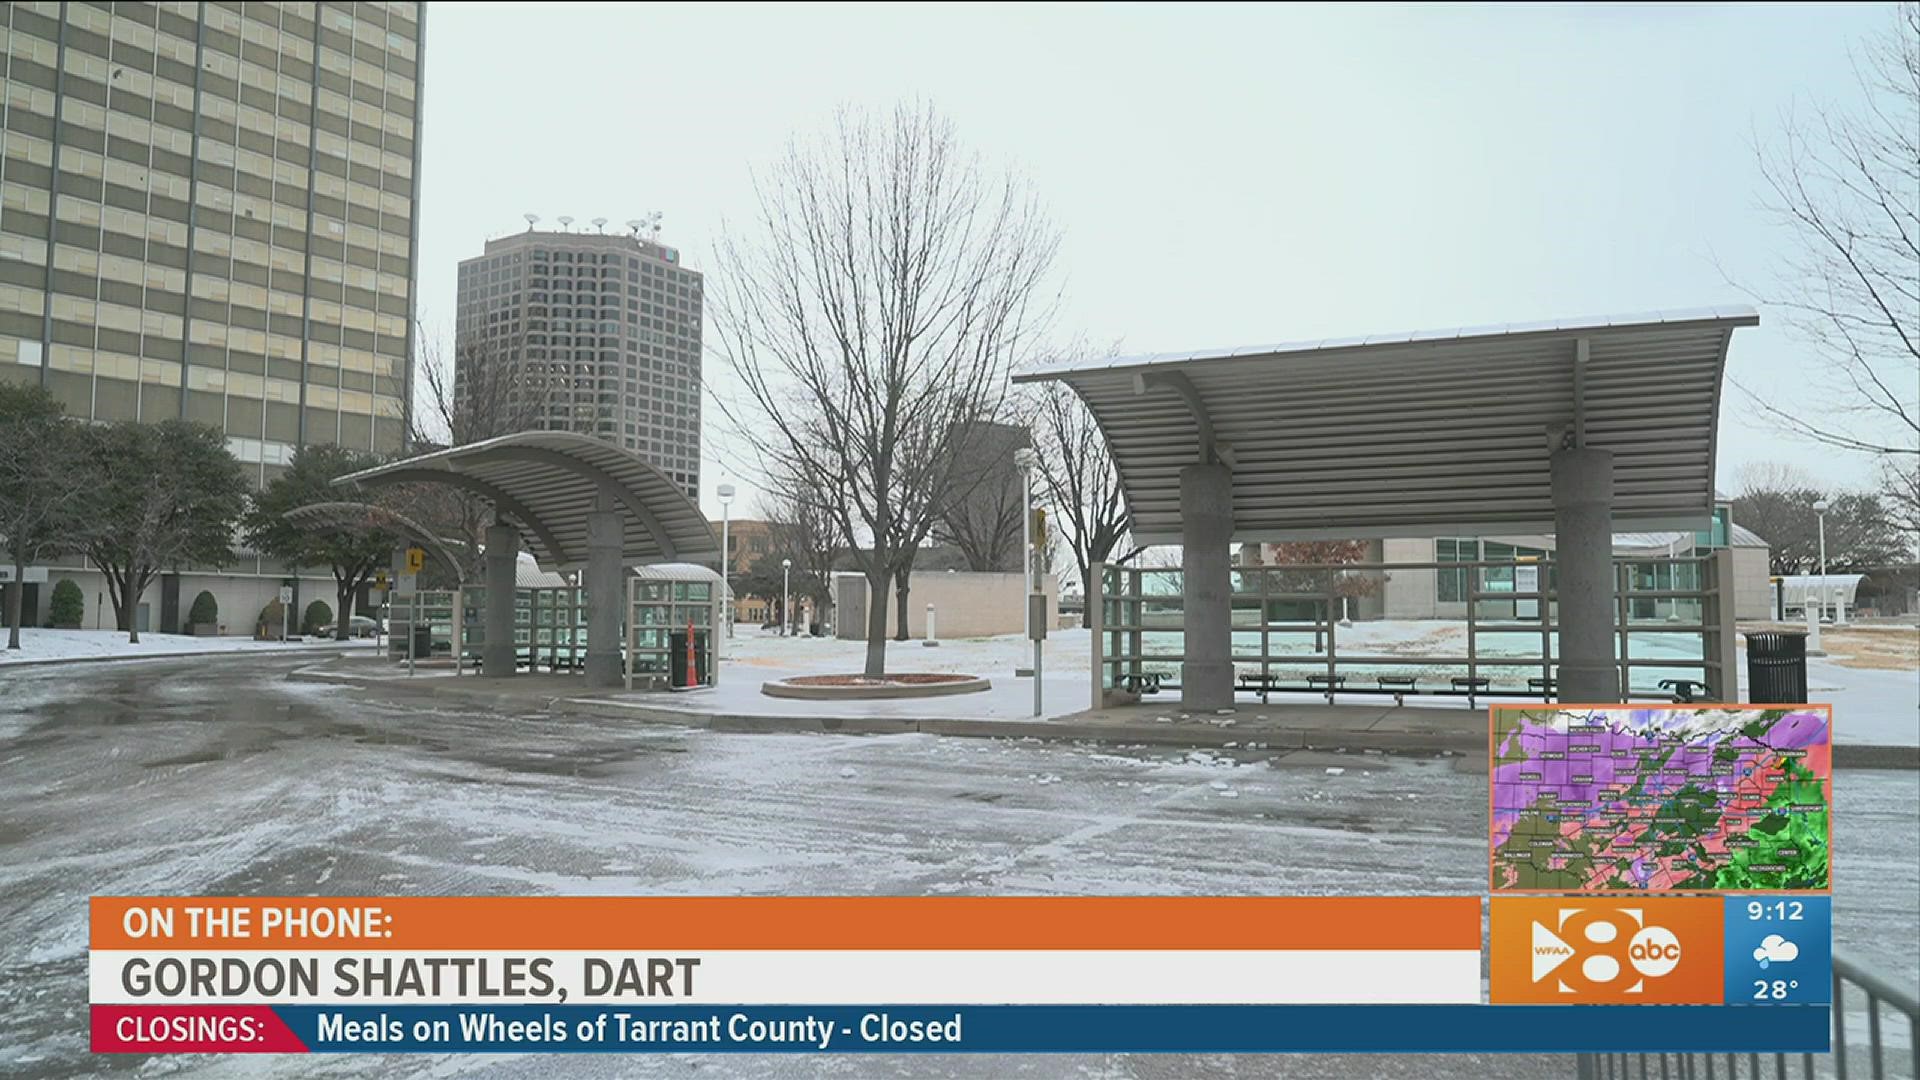 Gordon Shattles gives the latest information about transportation delays for DART.